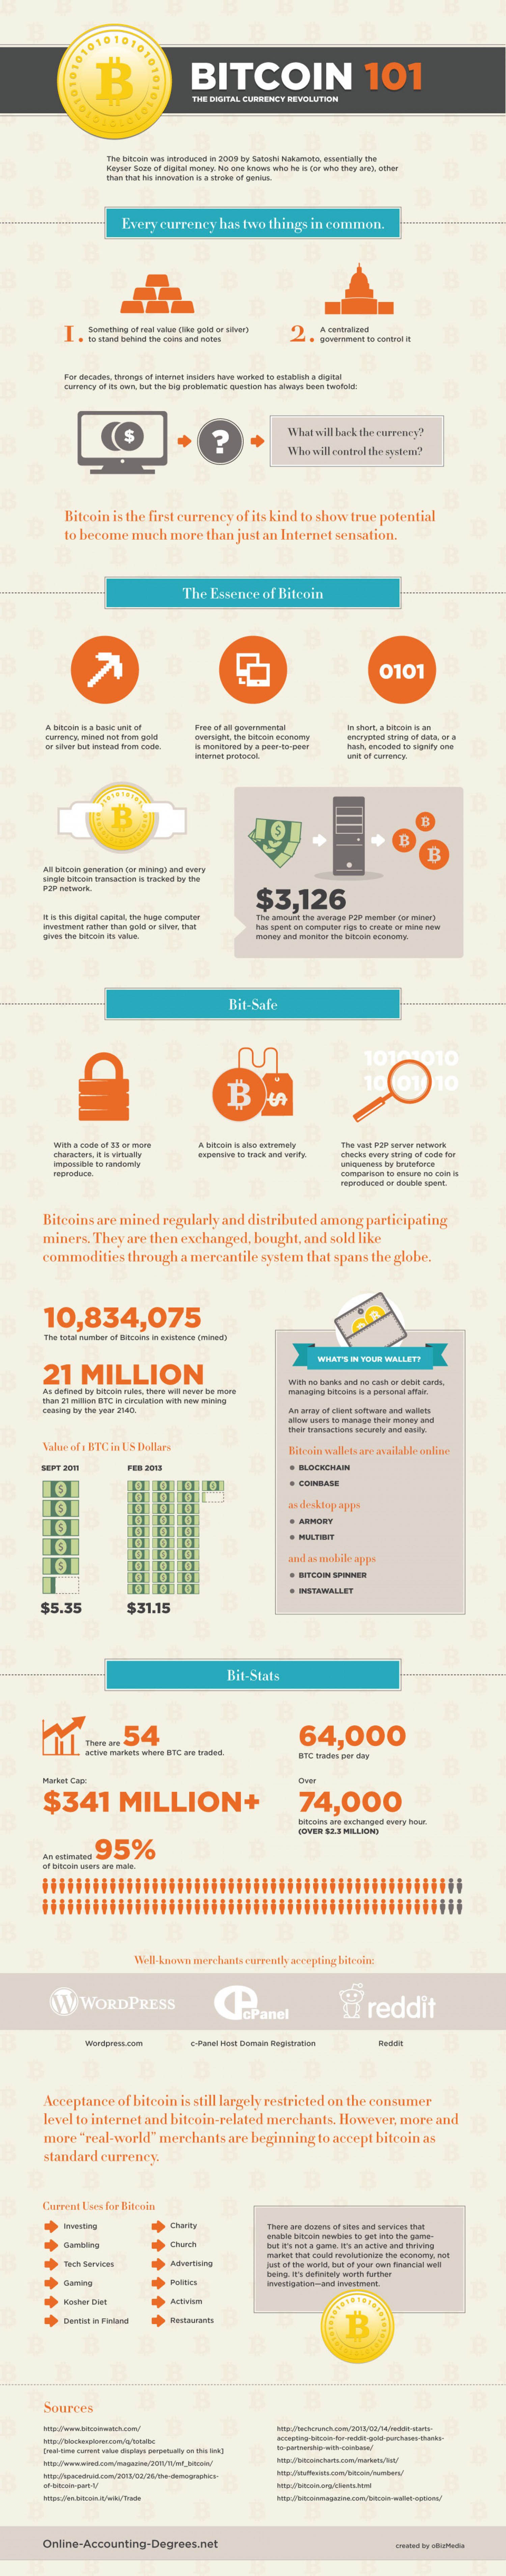 Bitcoin 101: The Digital Currency Revolution 